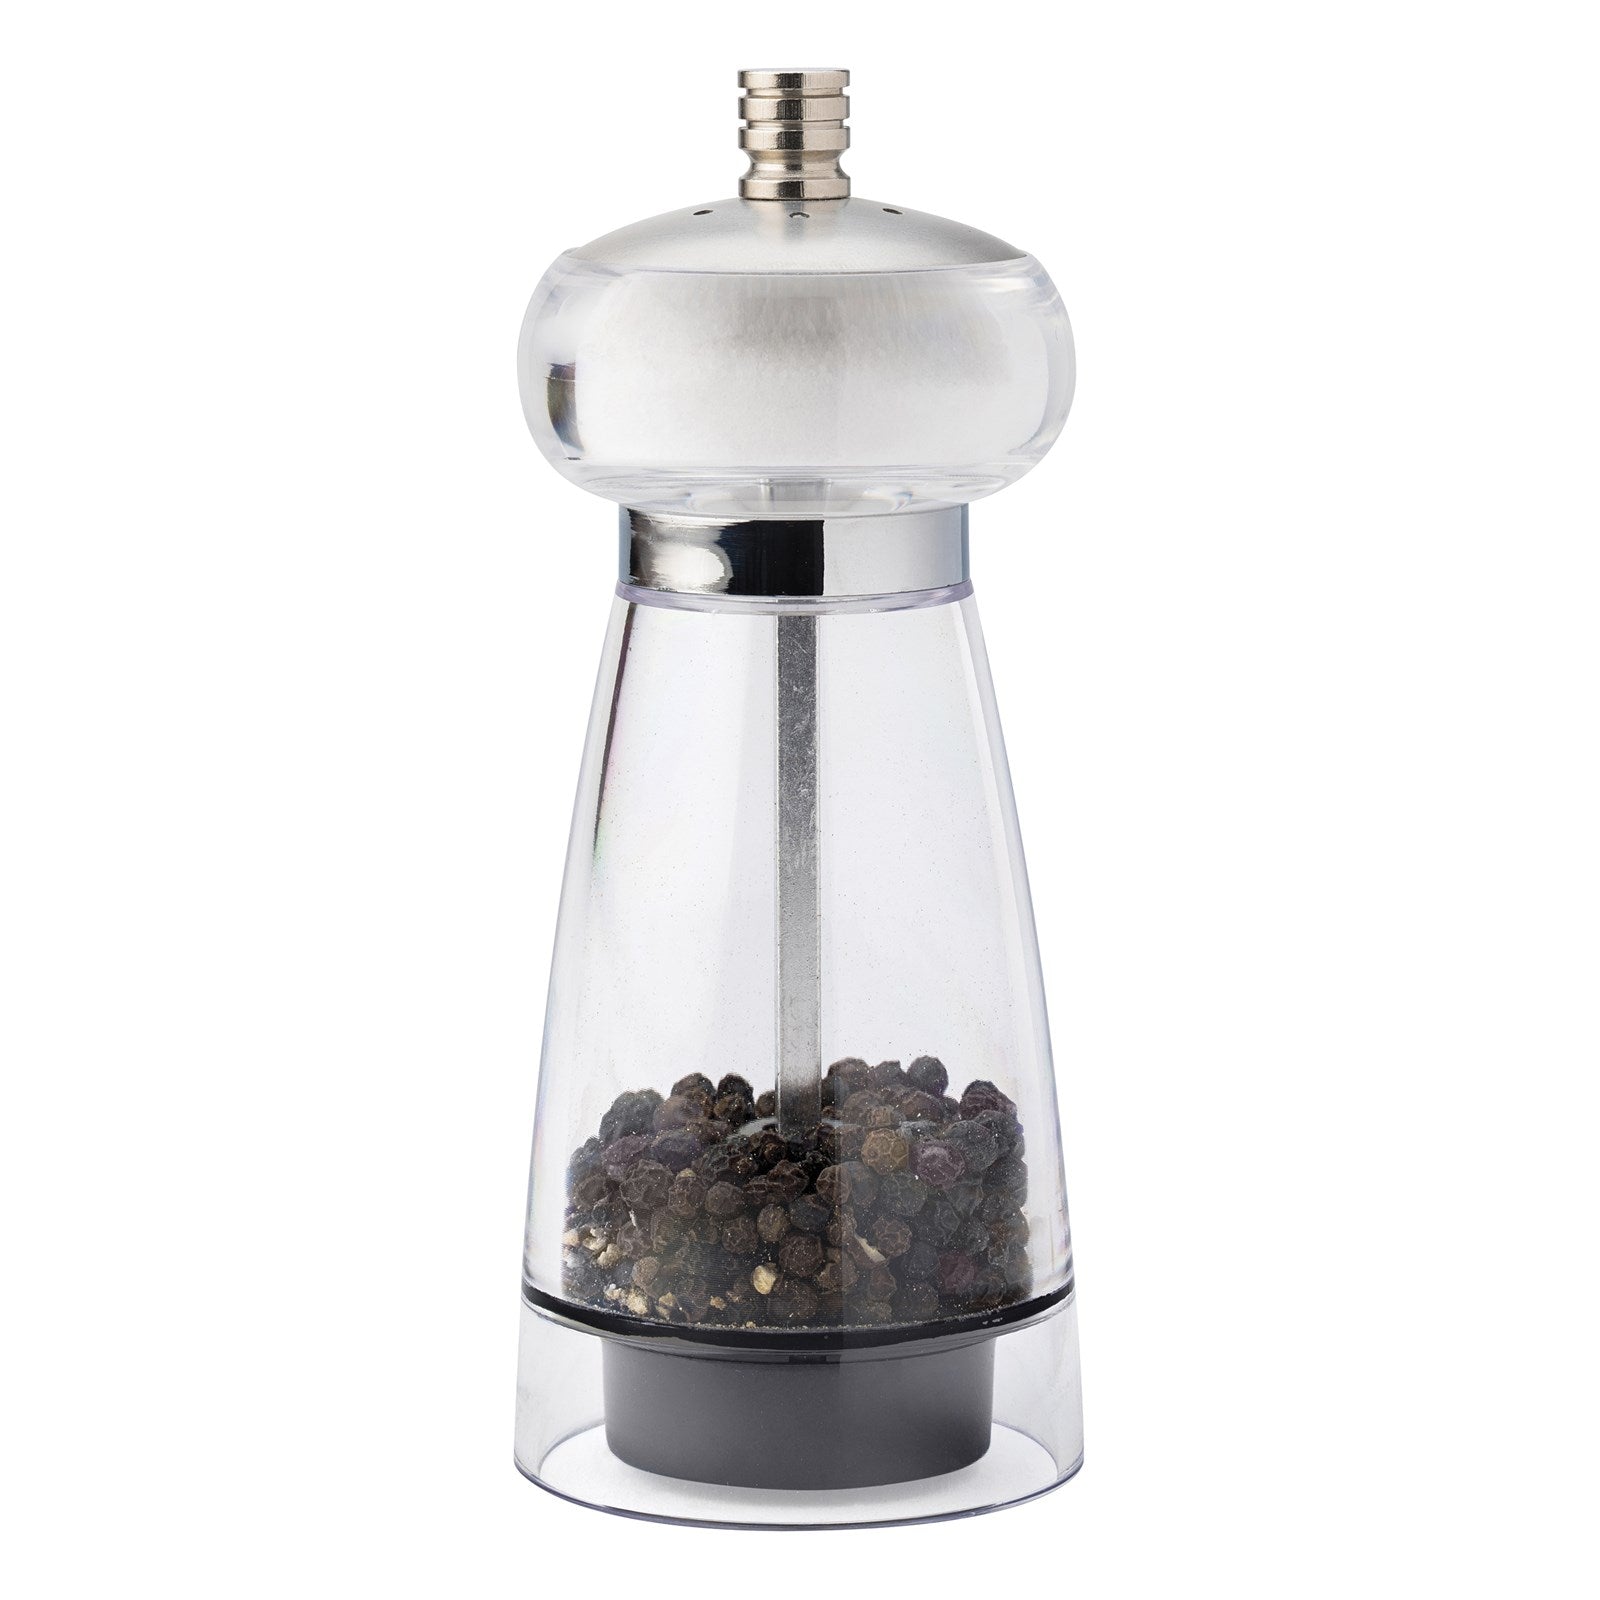 The English Tableware Company Comet Combi Pepper Mill and Salt Shaker